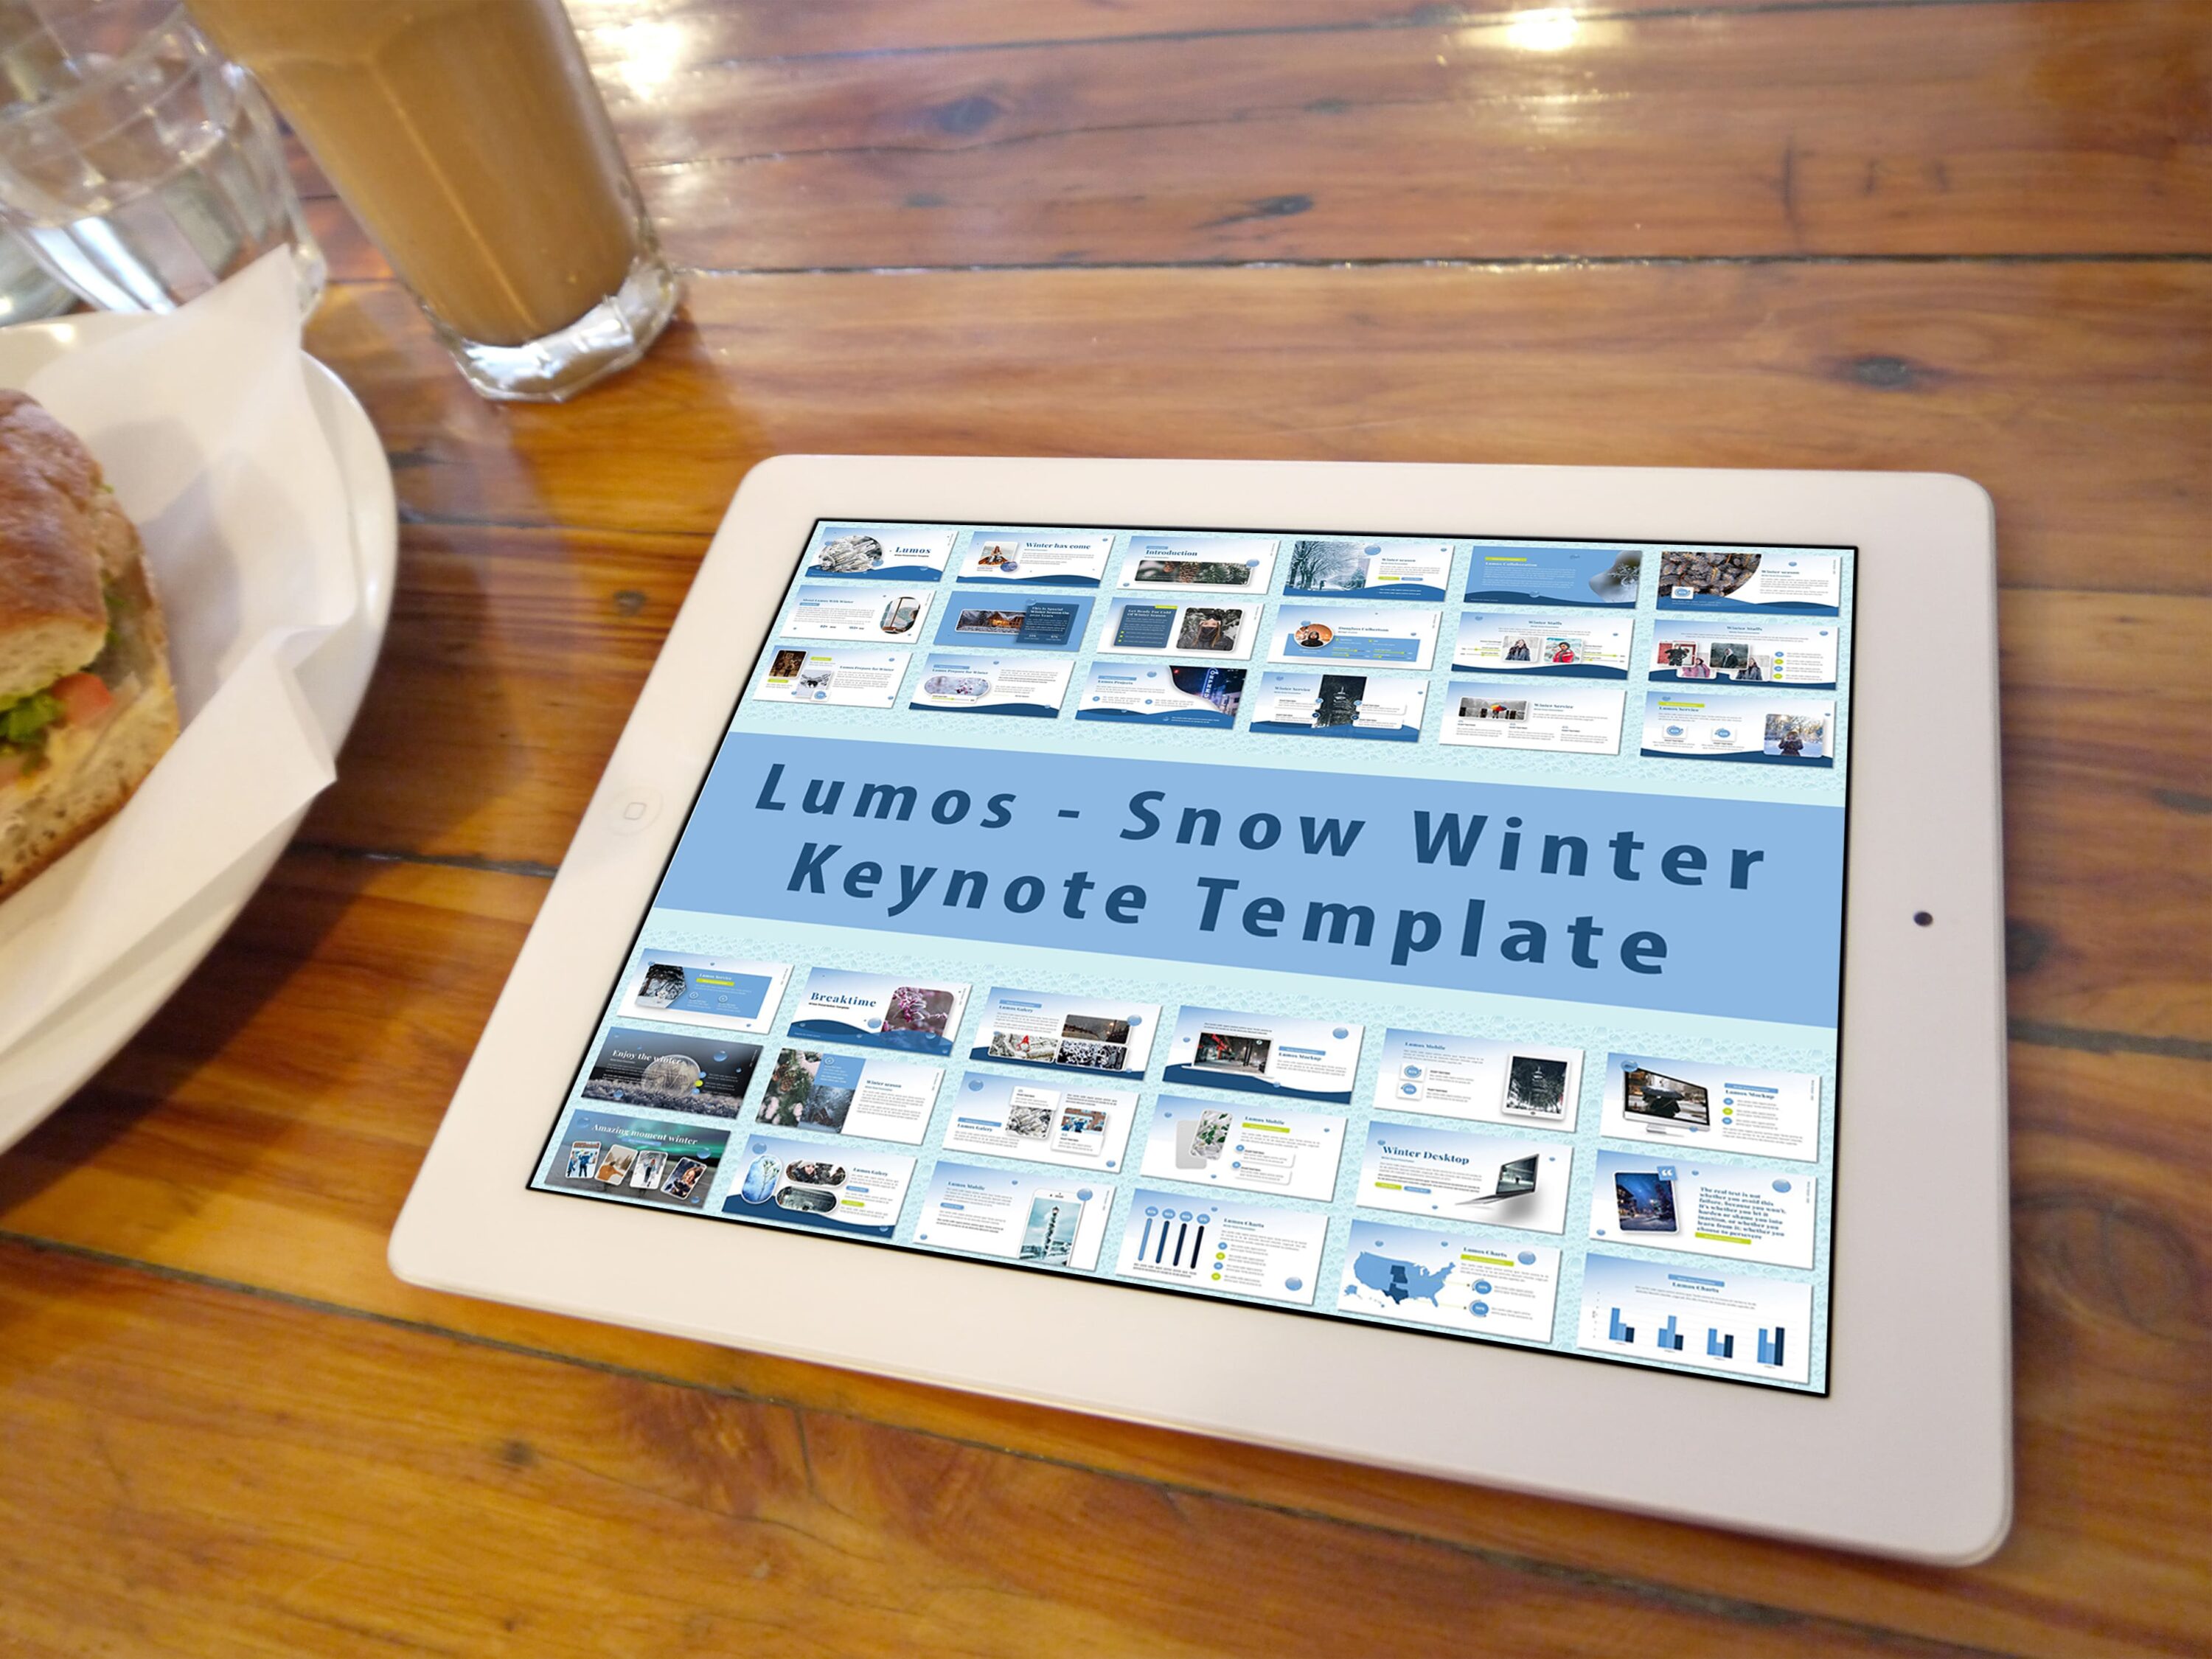 Tablet option of the Lumos - Snow Winter Keynote Template.